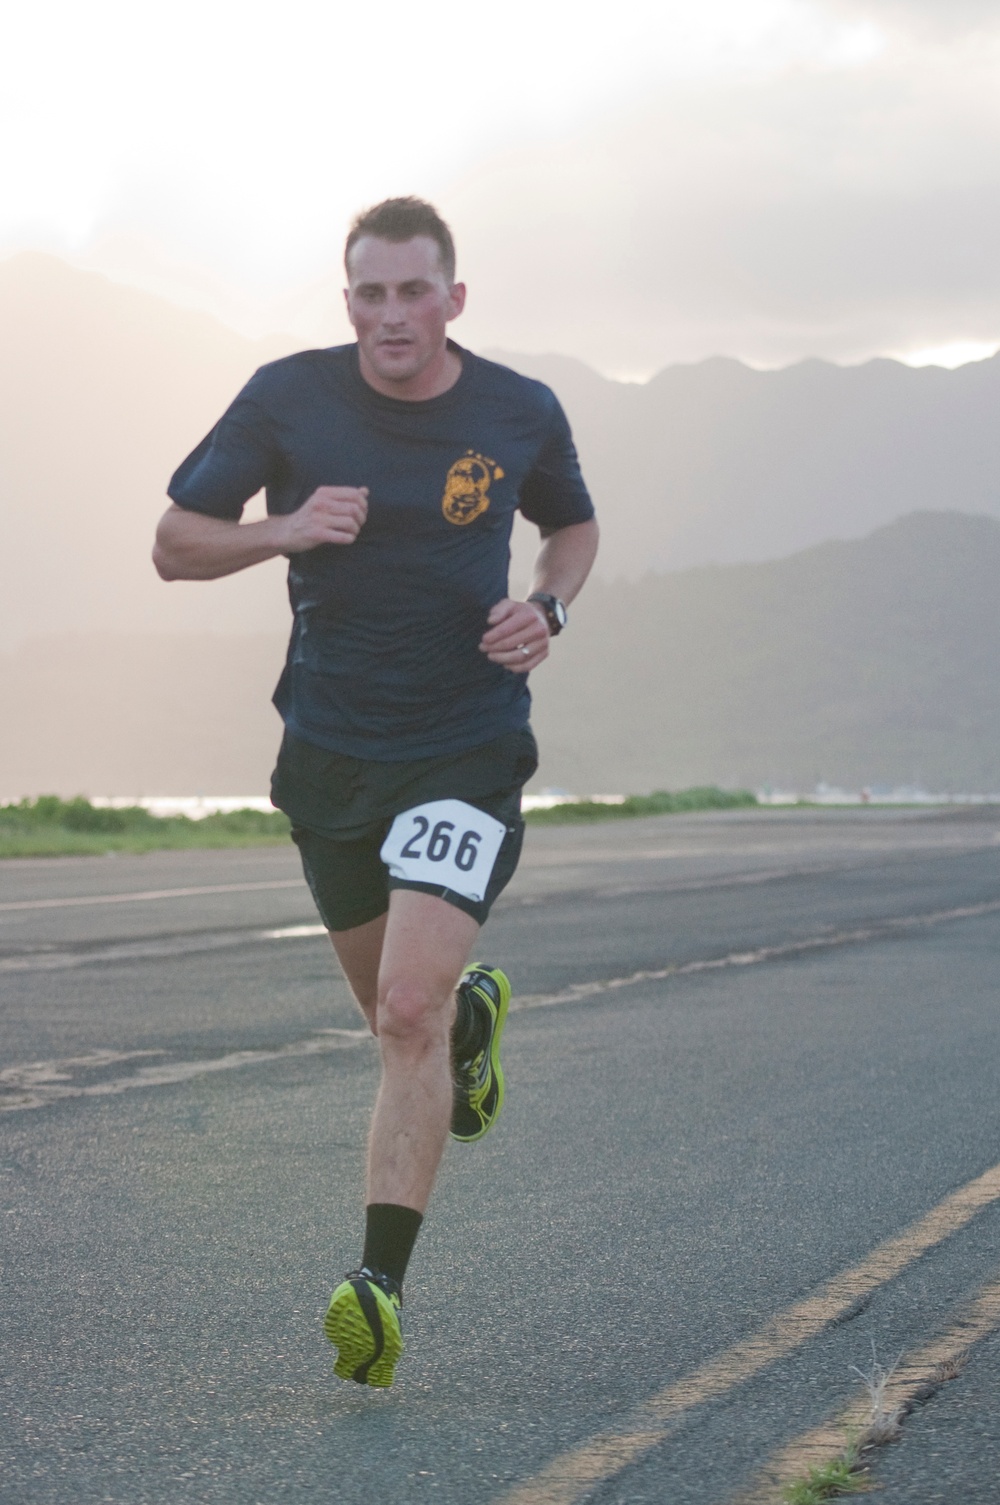 Runners take flight against the dying of the light